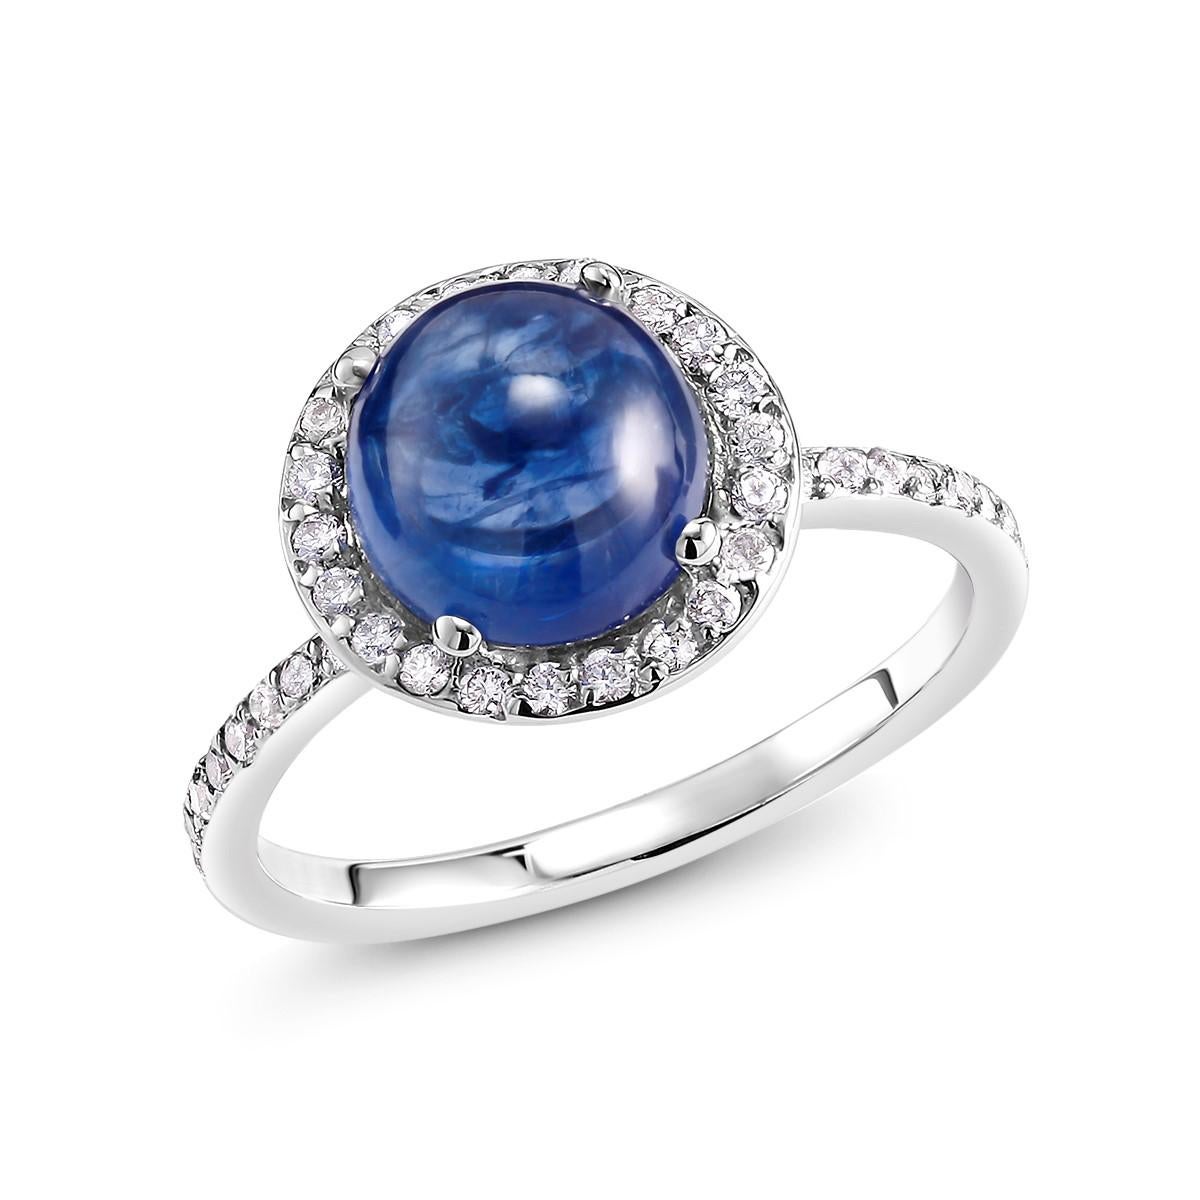 Round Cut Ceylon Cabochon Sapphire and Diamond Gold Cocktail Ring Weighing 4.30 Carat